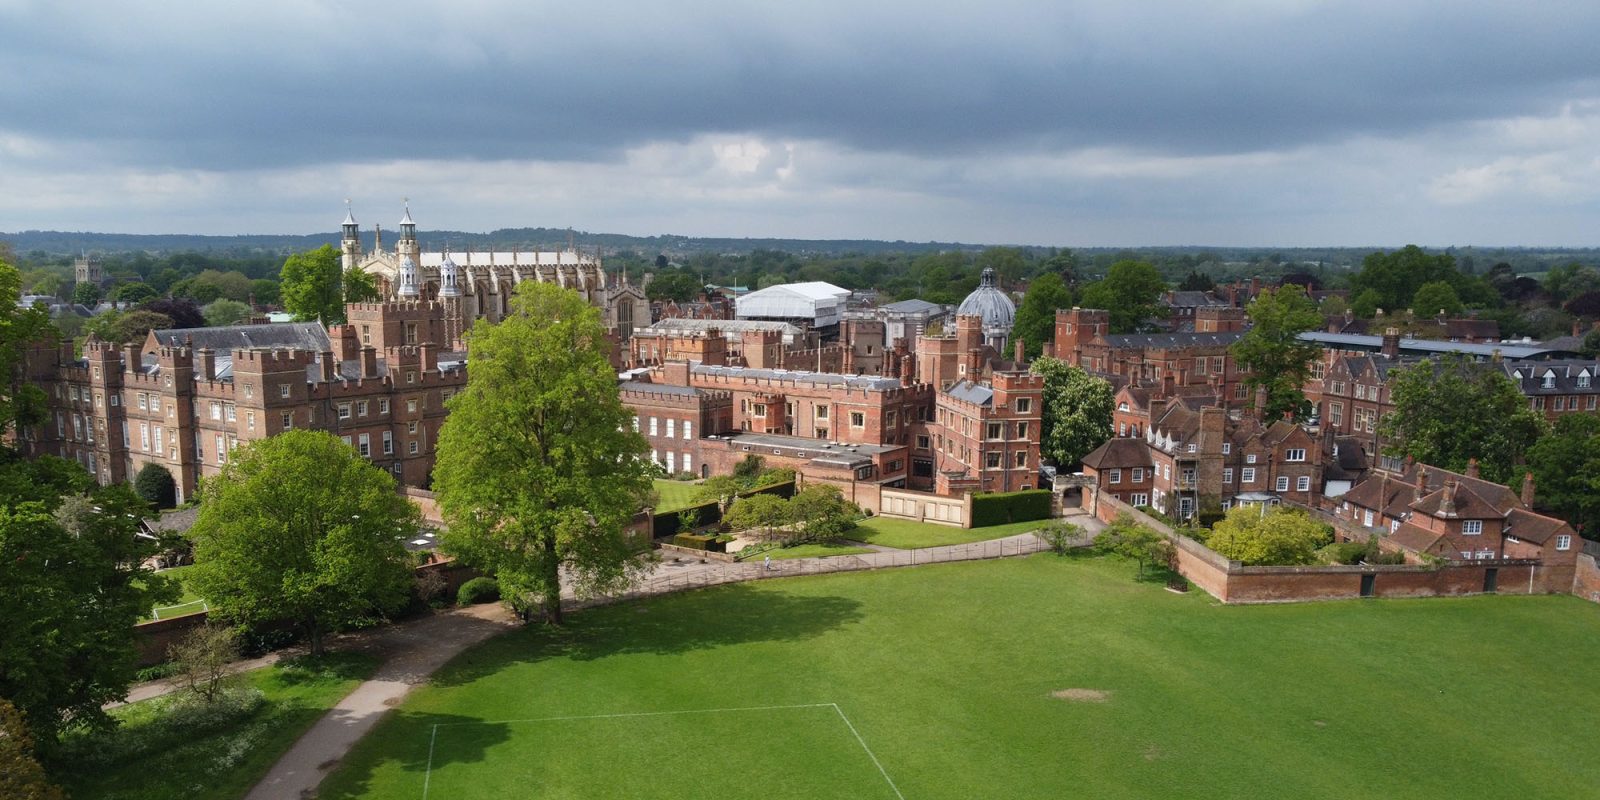 Eton students being forced to swap their iPhones for Nokia dumbphones | Drone shot of the school